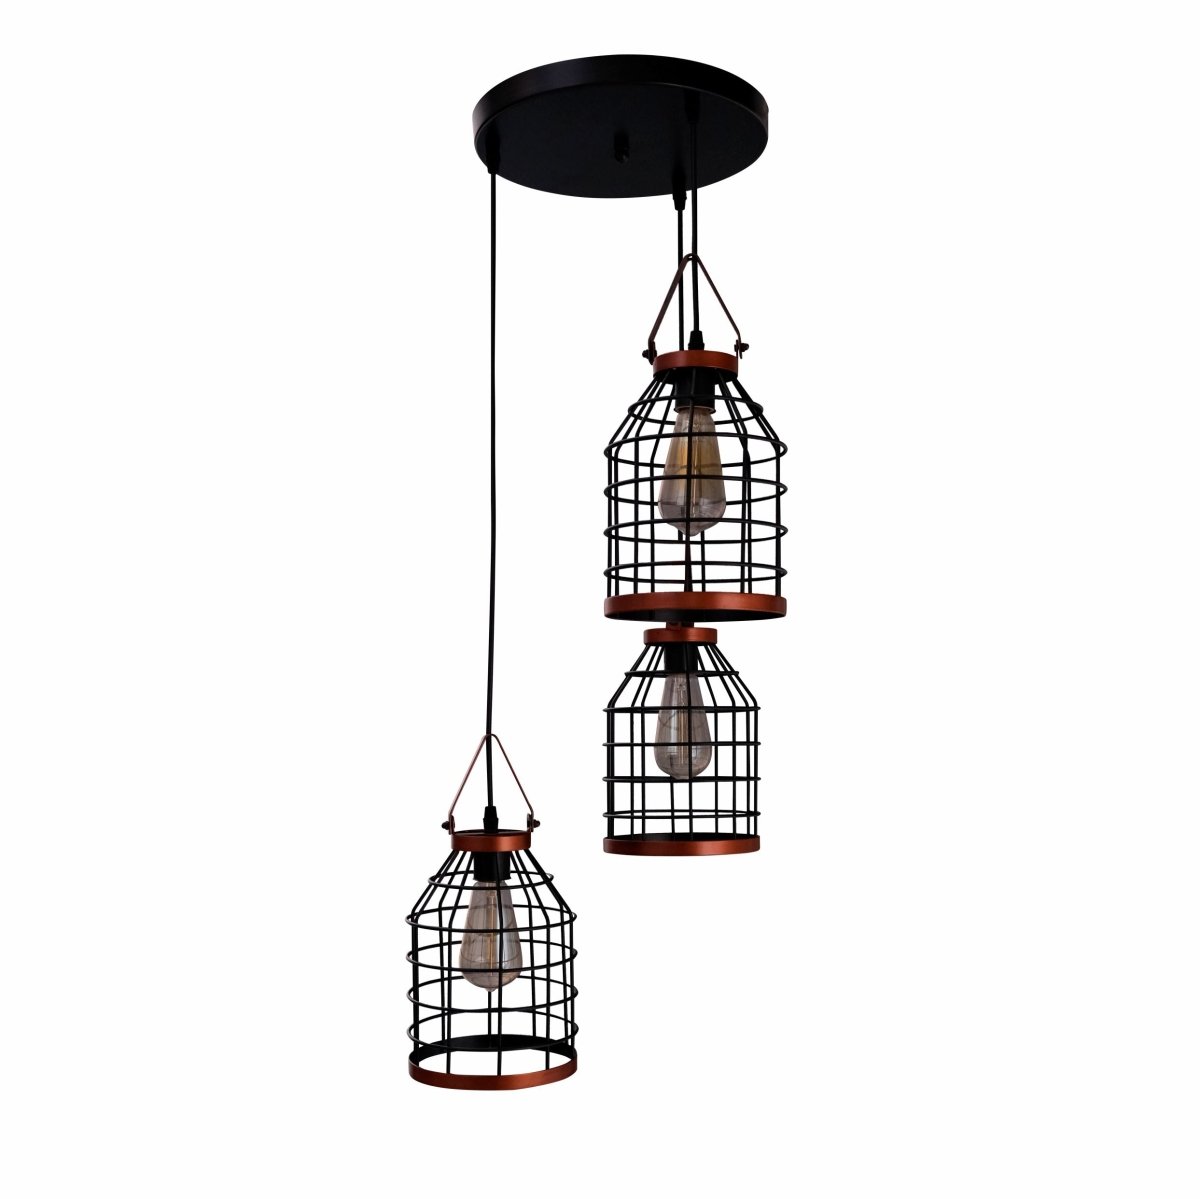 Main image of Black Cage Metal Pendant Light with 3xE27 Fitting | TEKLED 156-19516